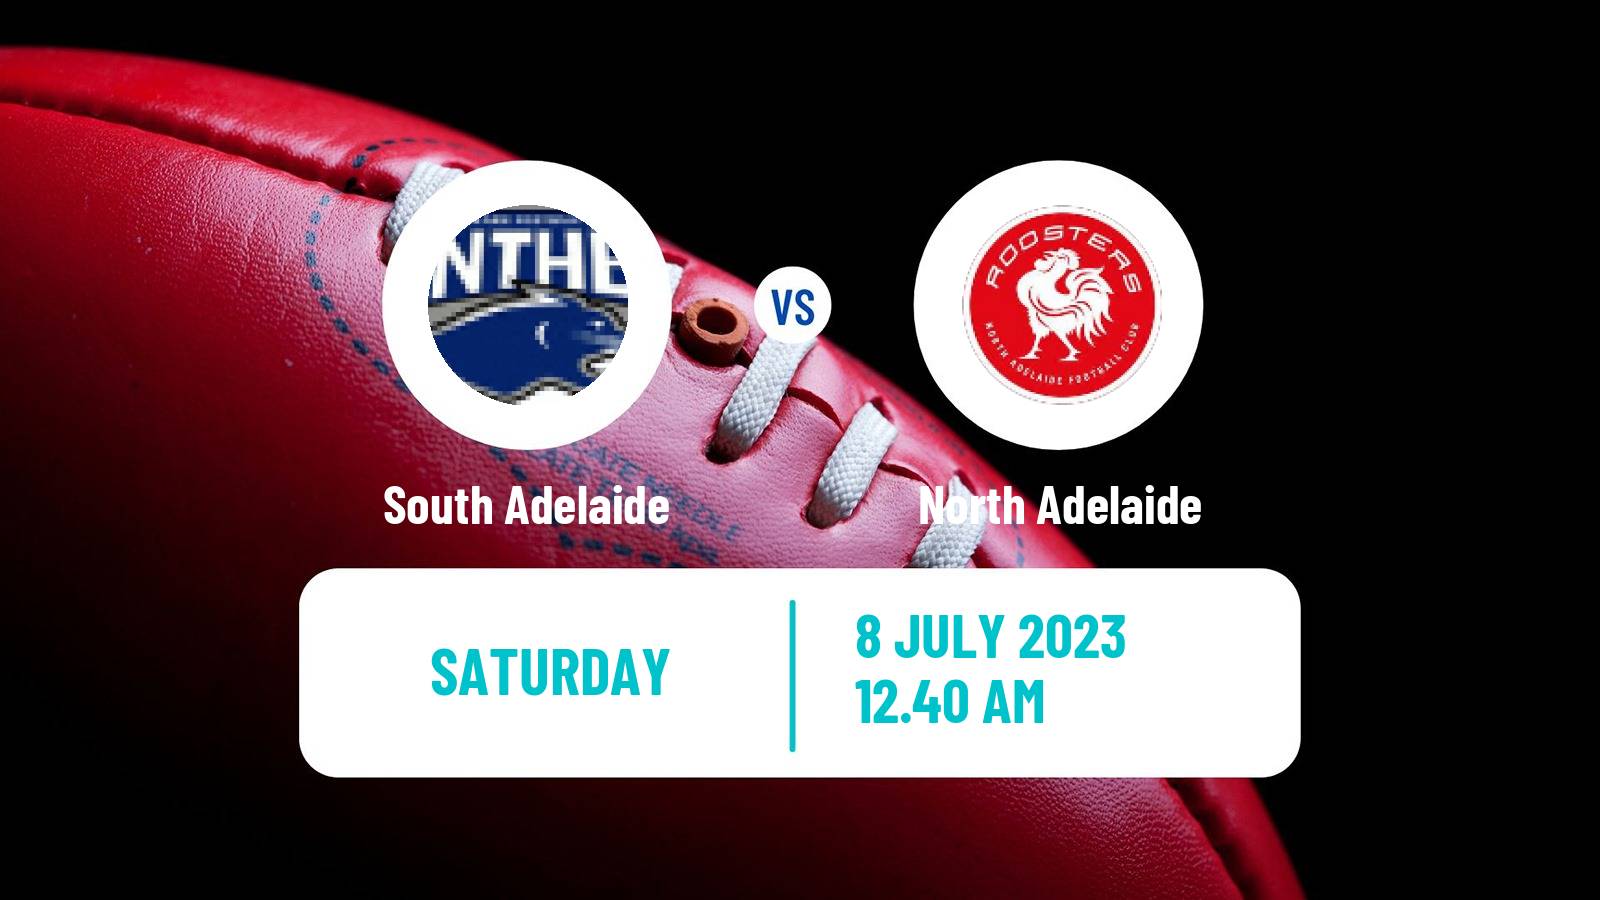 Aussie rules SANFL South Adelaide - North Adelaide